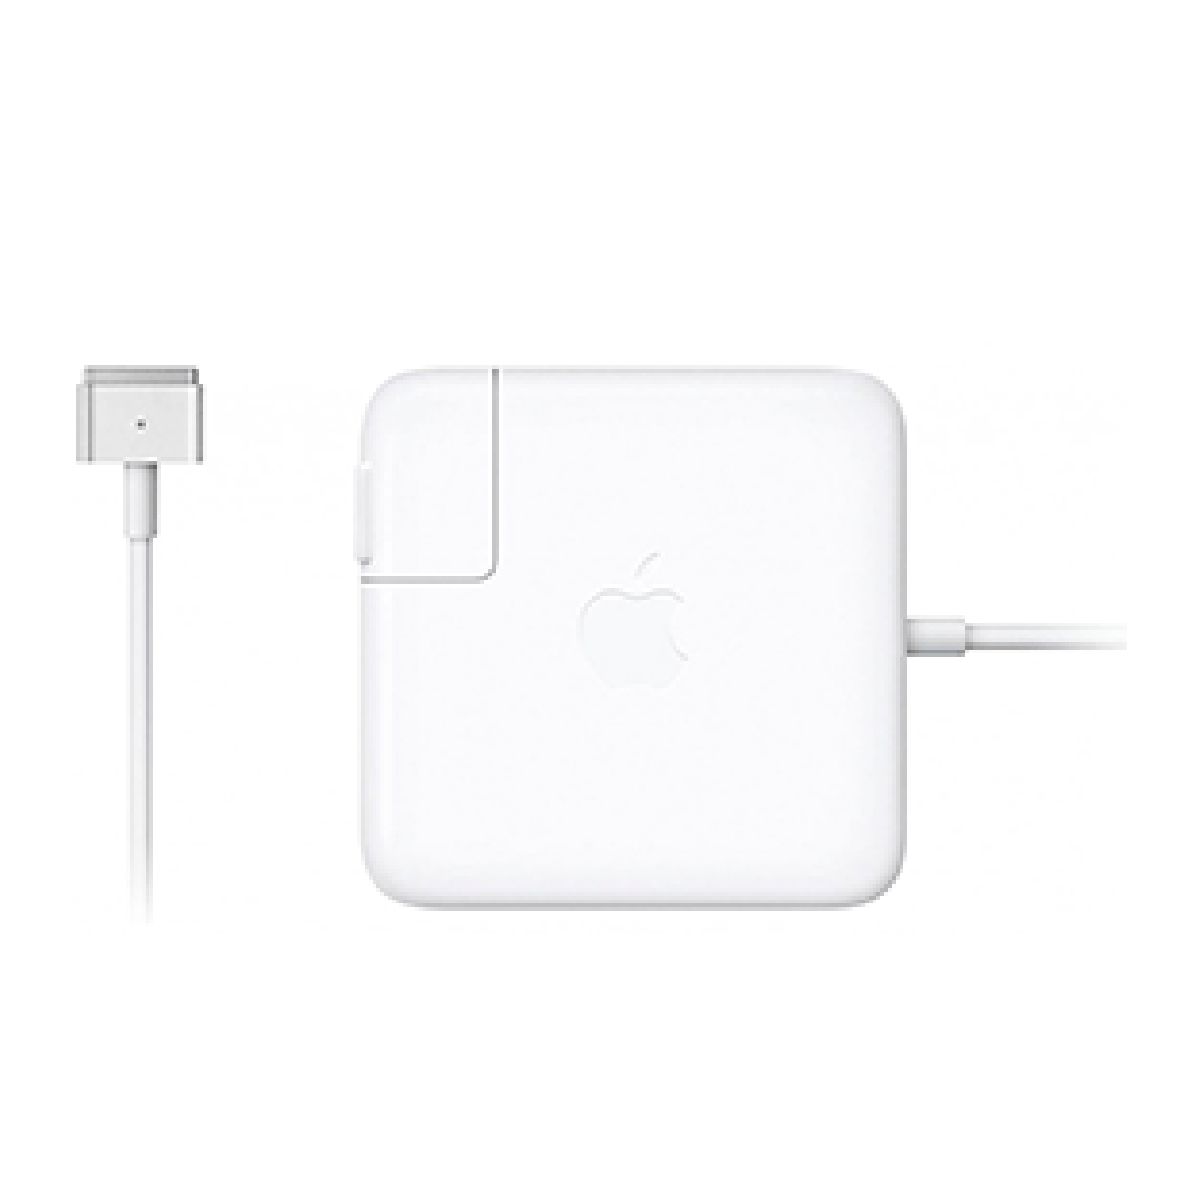 Apple 60W Magsafe 2 Power Adapter for 13-inch MacBook Pro Retina